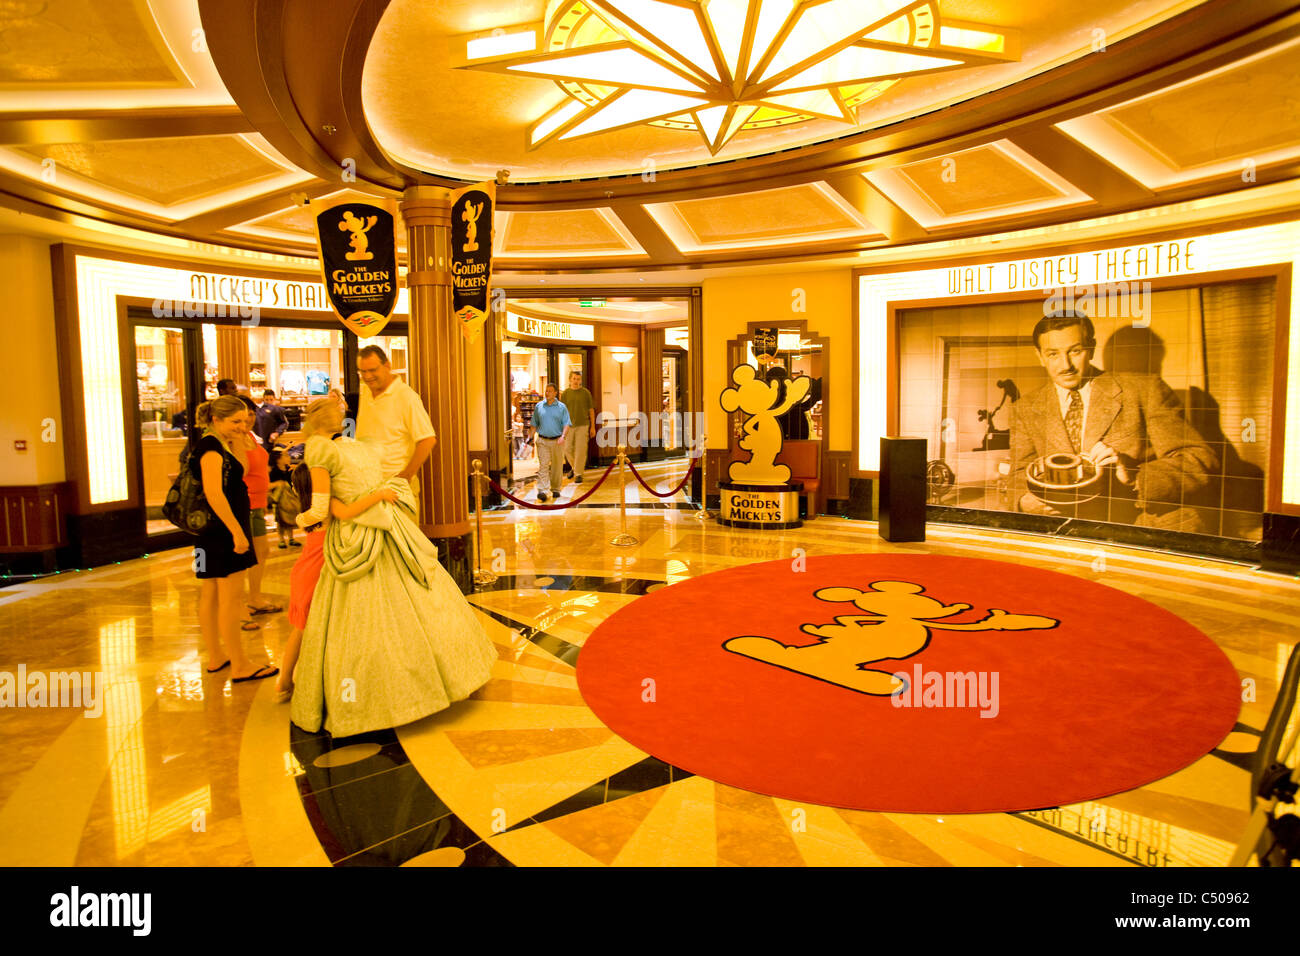 Disney Dream's shipboard shopping complex offers a variety of glitzy shops and boutiques, Bahamas Stock Photo